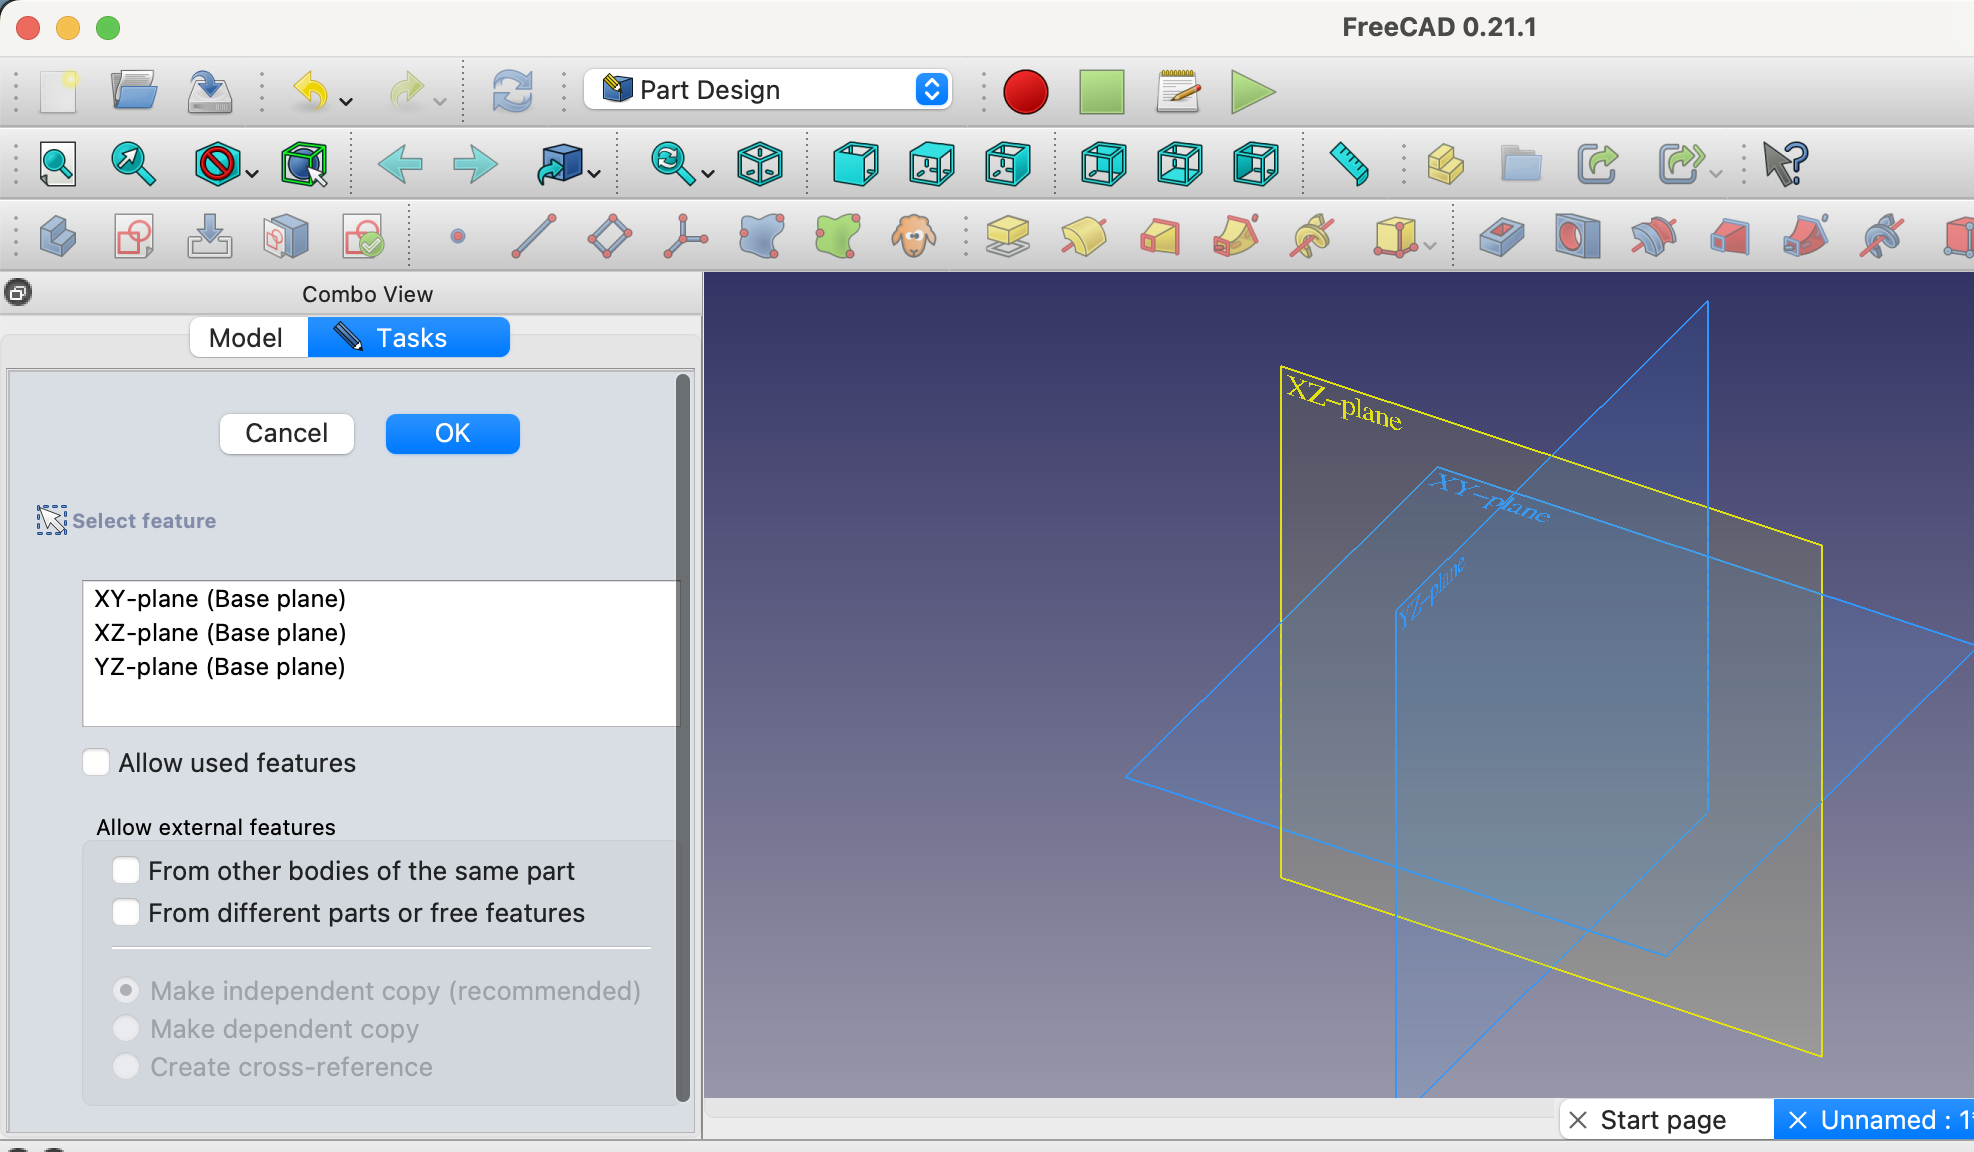 FreeCAD Interface Overview